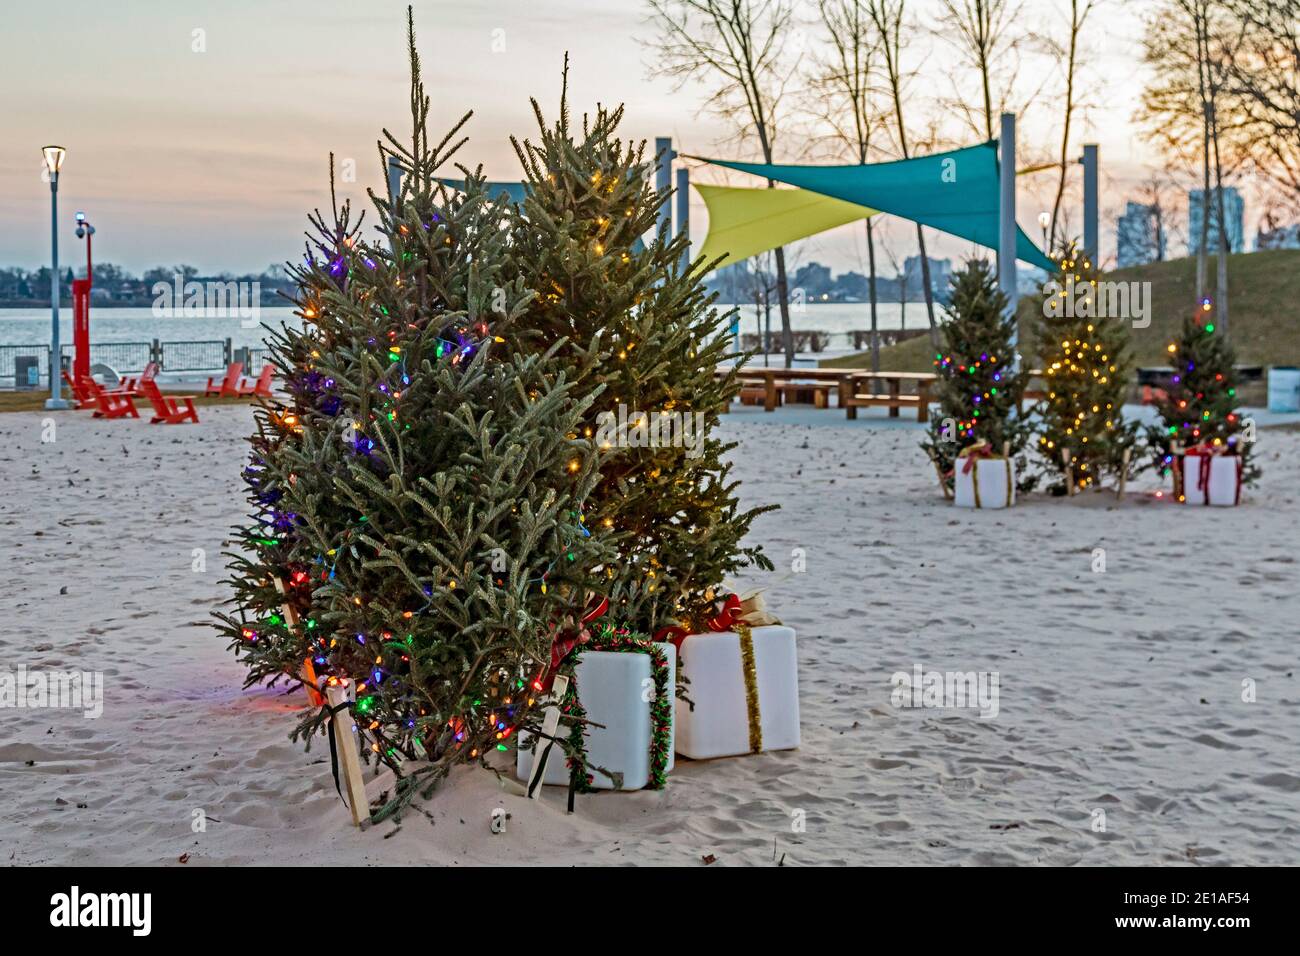 Detroit, Michigan - Christmas decorations on the beach at the new Robert C. Valade Park along the Detroit River. Stock Photo